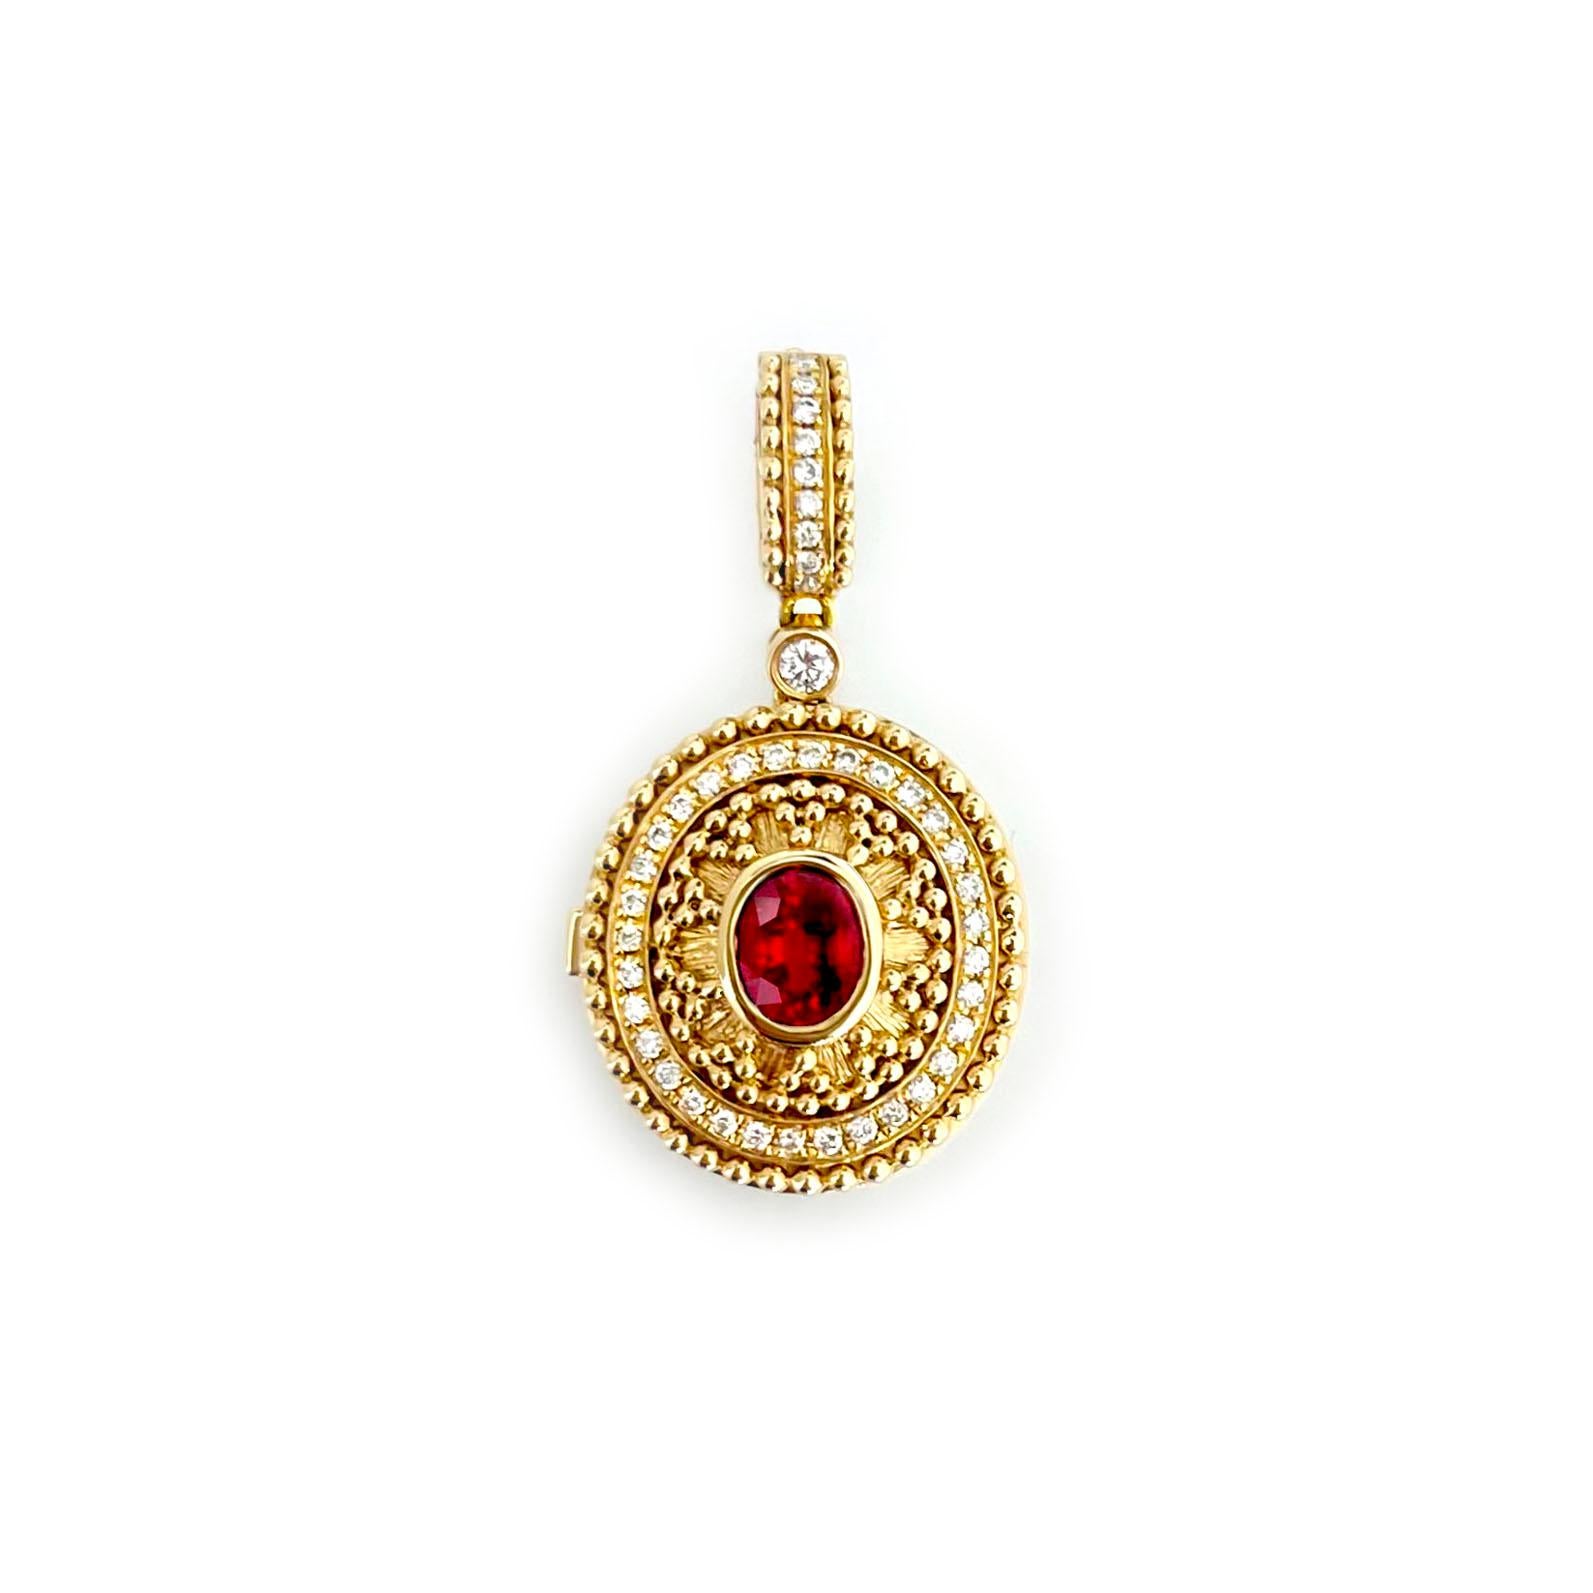 Produced by award winning Italian designer Stefano Vitolo. Stefano creates custom artisanal one of a kind jewelry with excellent gemstones in a truly old world Italian craftmanship.

Gemstones: Ruby 0.66ct, Diamonds 0.16ct
Width x Length: 15 x 30mm